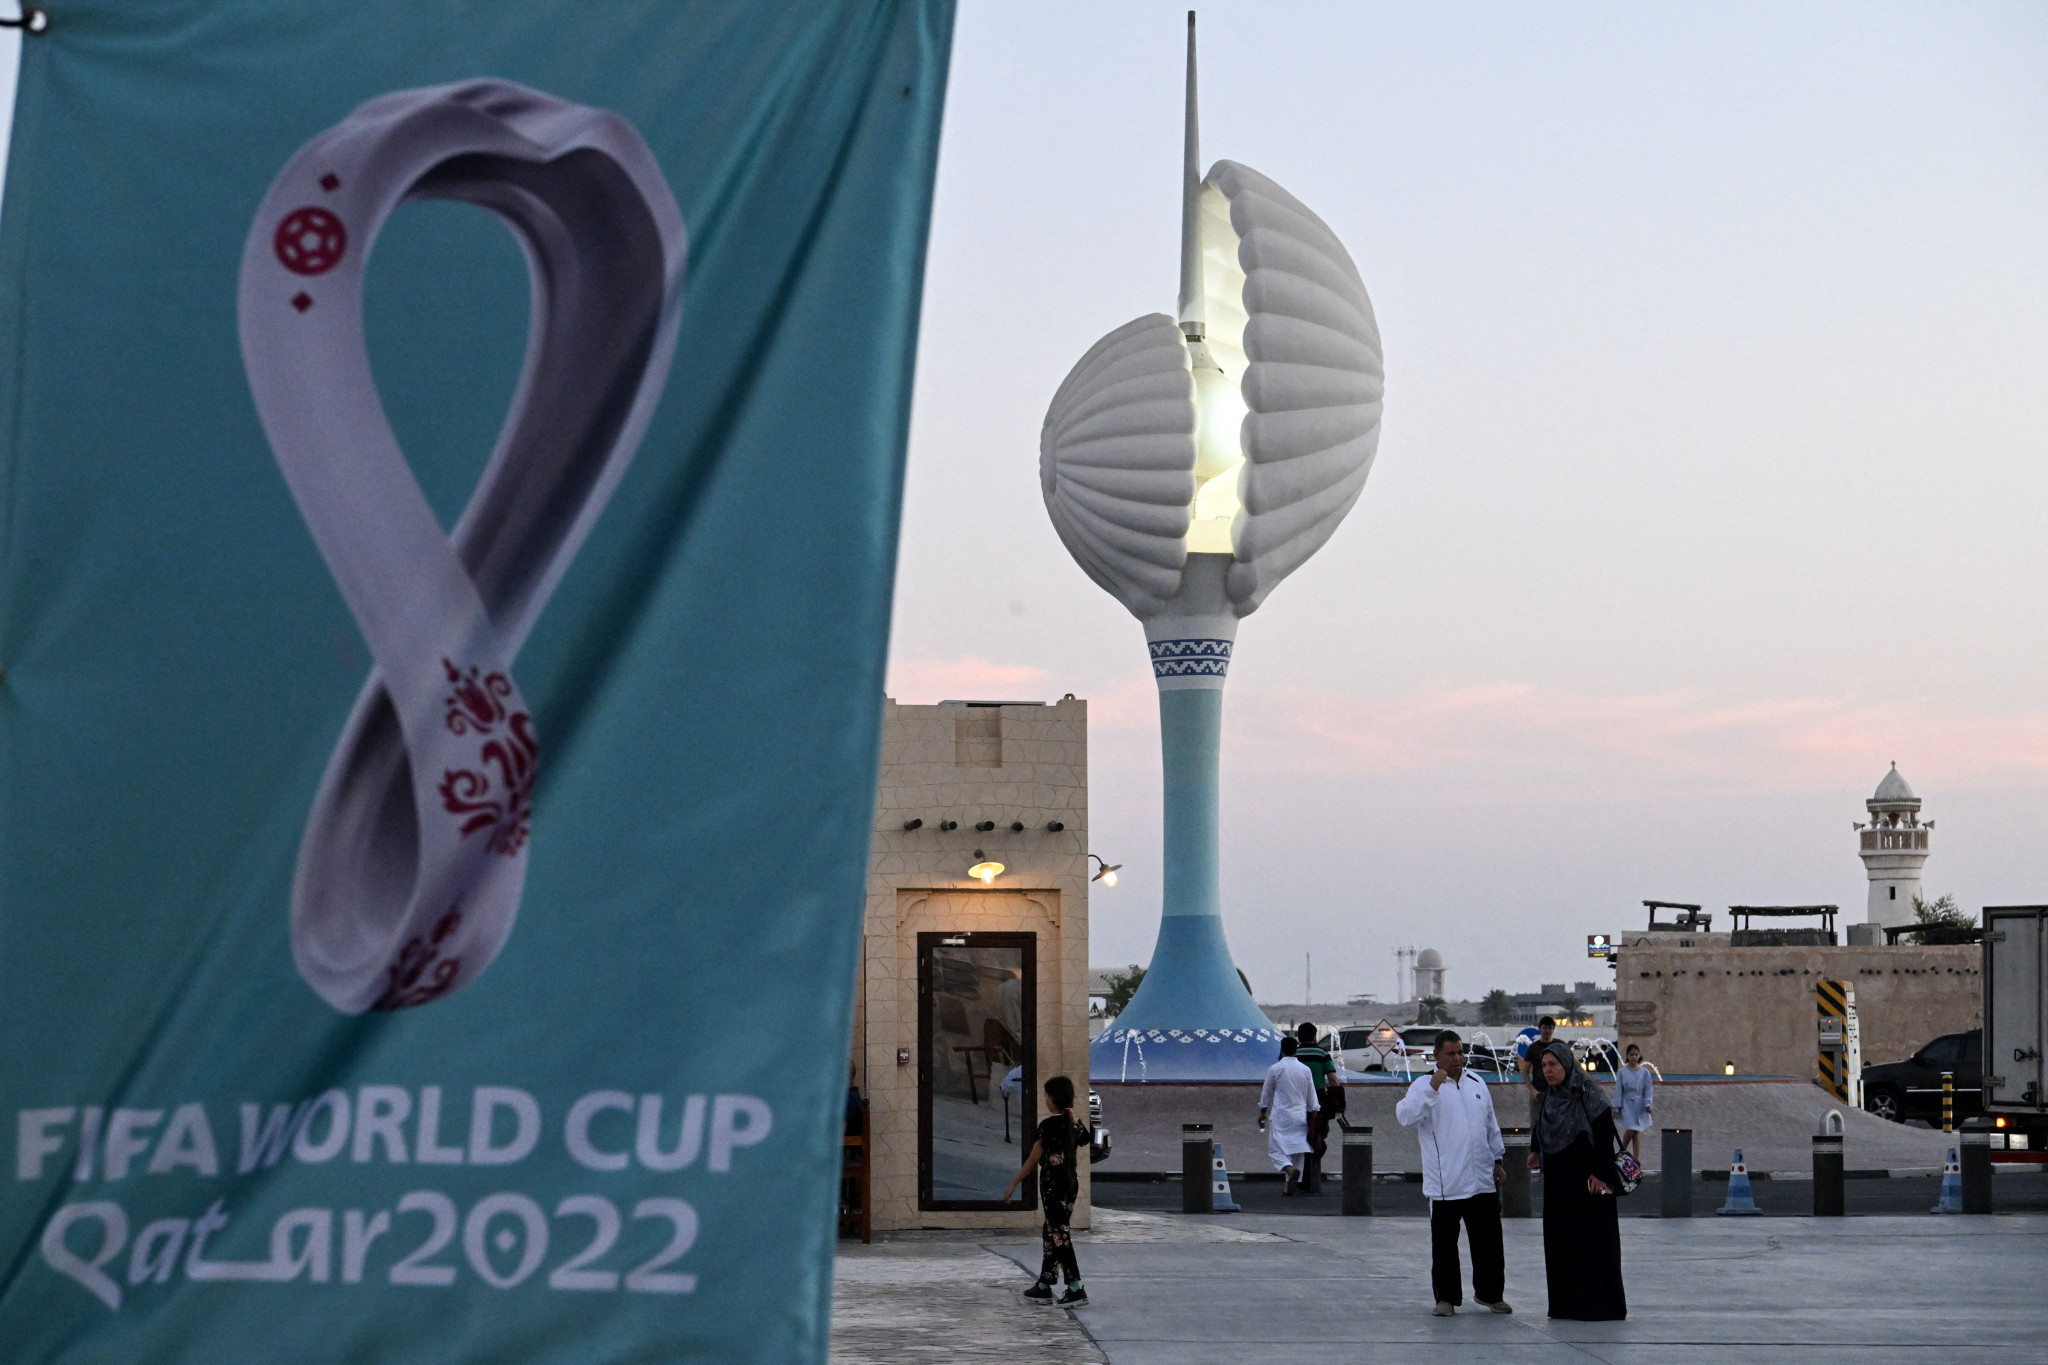 Asian Football Confederation President urges "solidarity" with Qatar 2022 FIFA World Cup